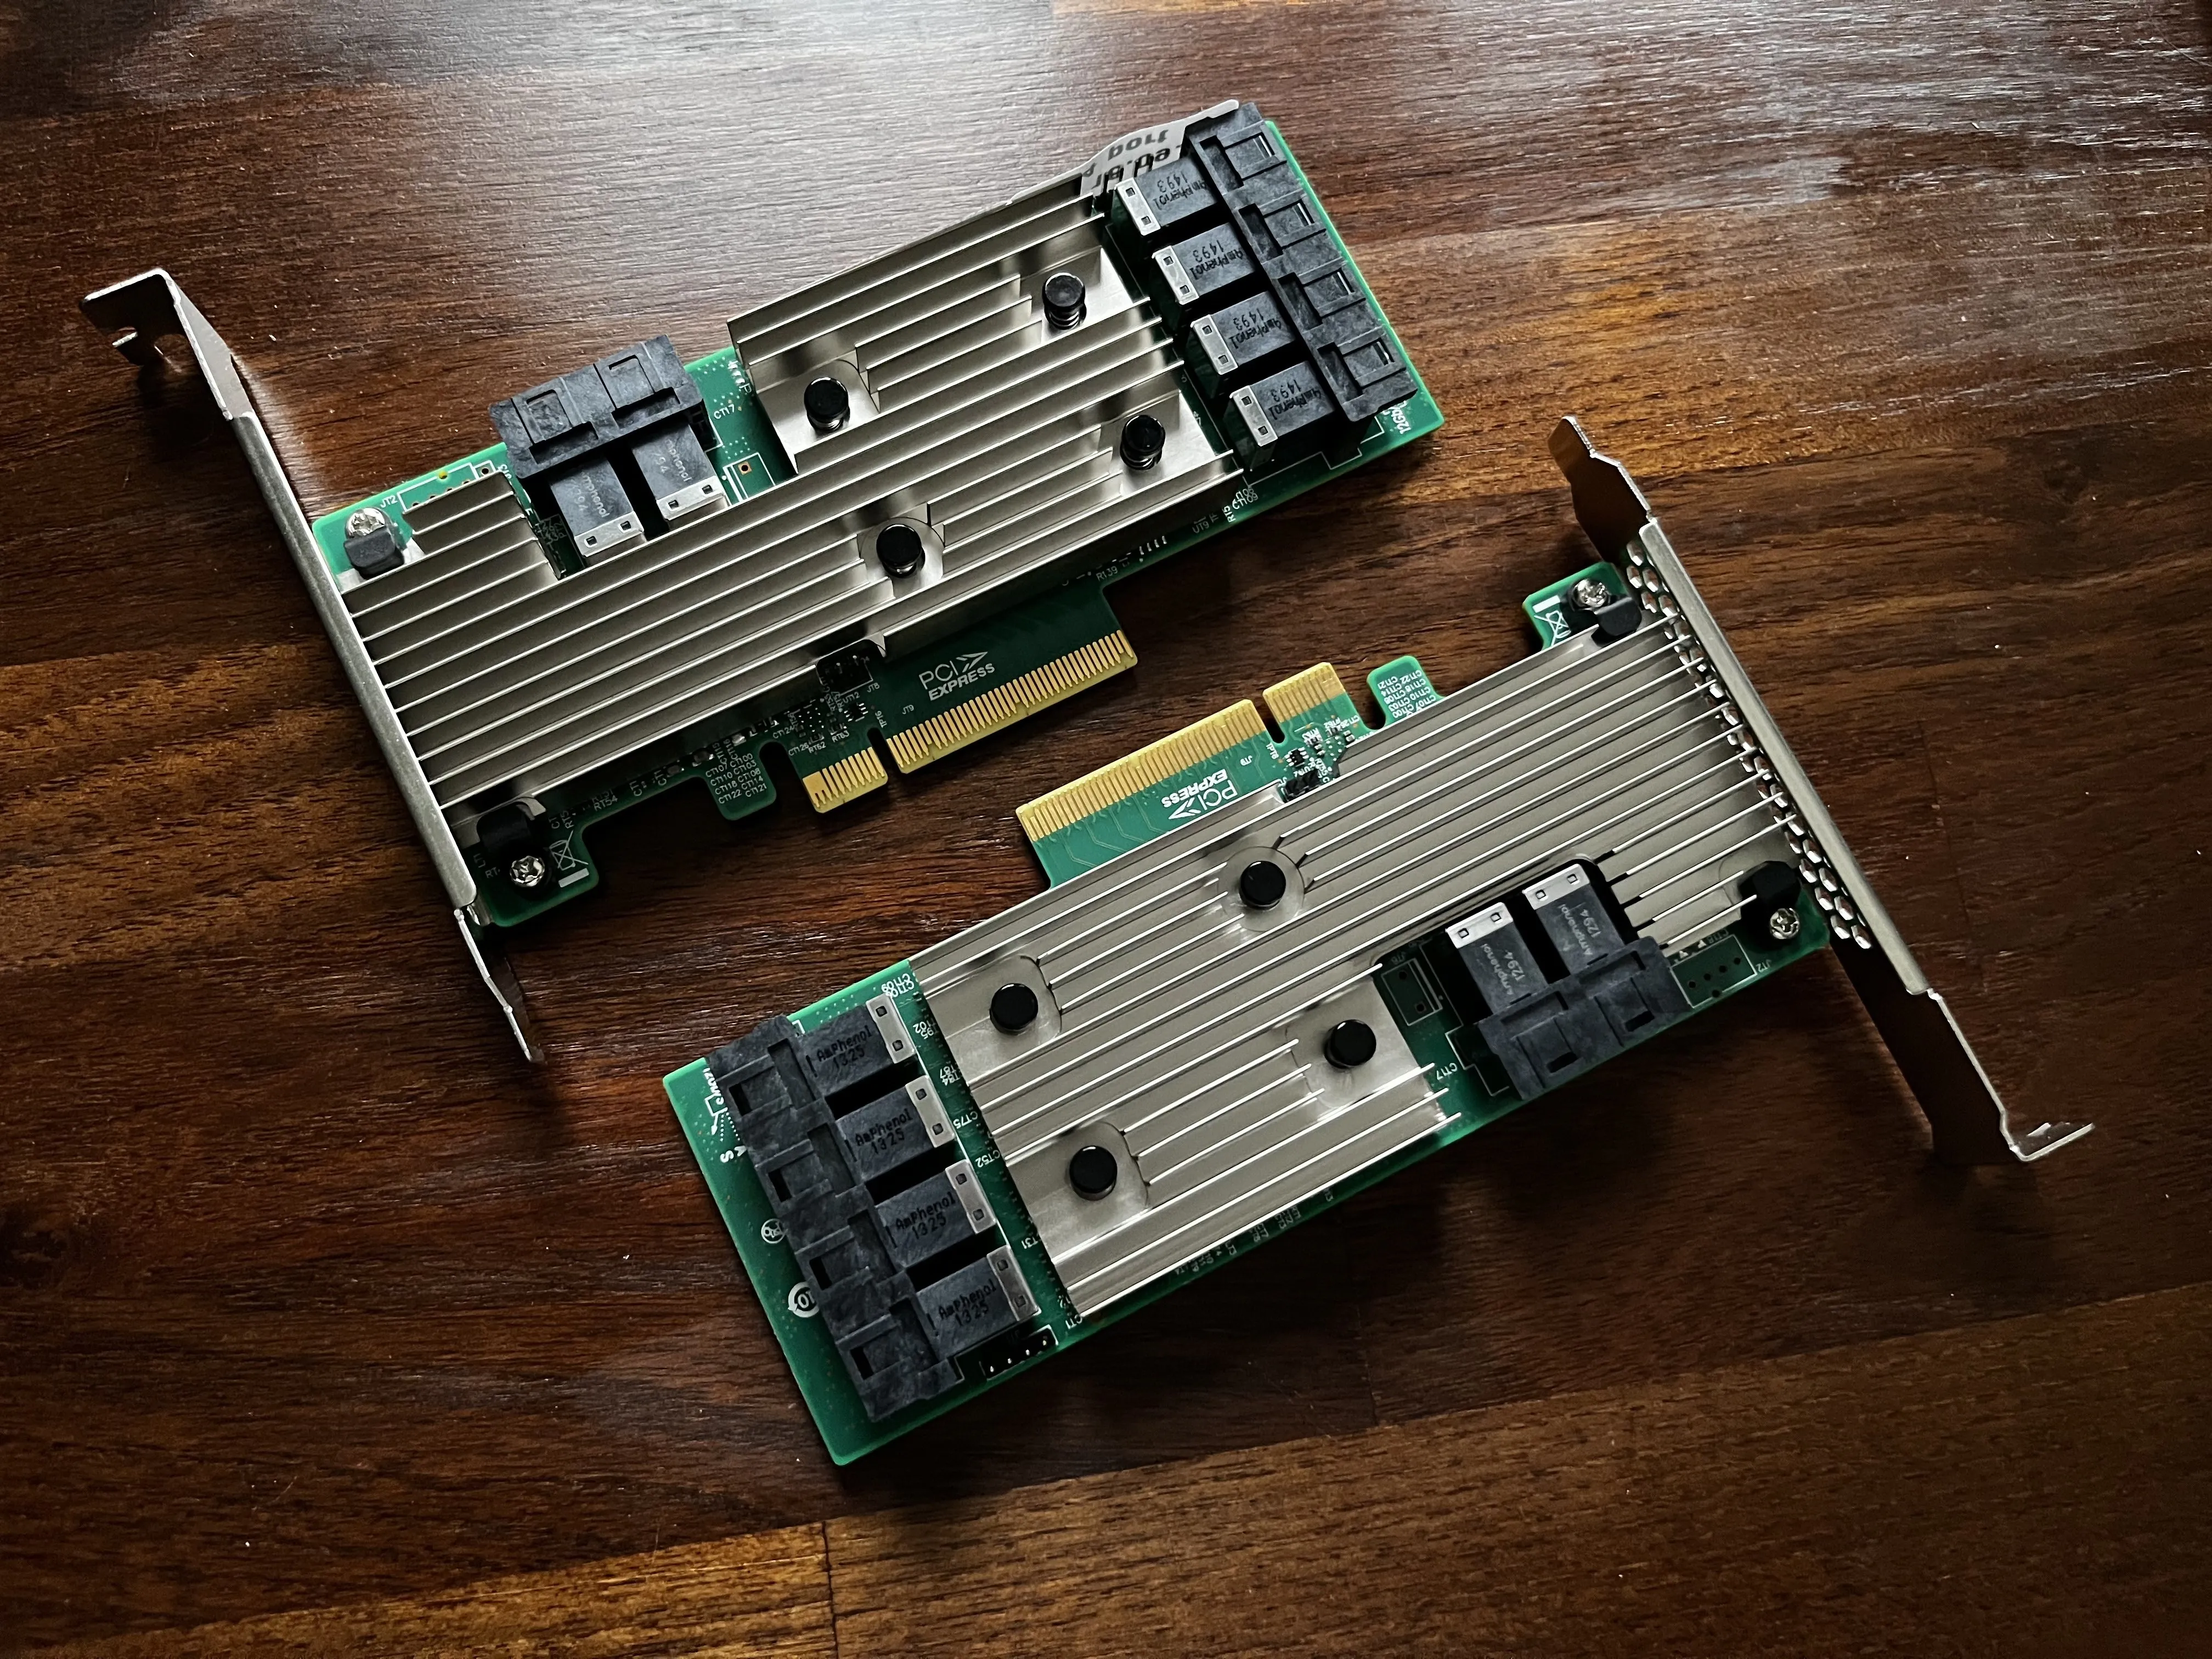 Photo showing two identical 9305-24i cards